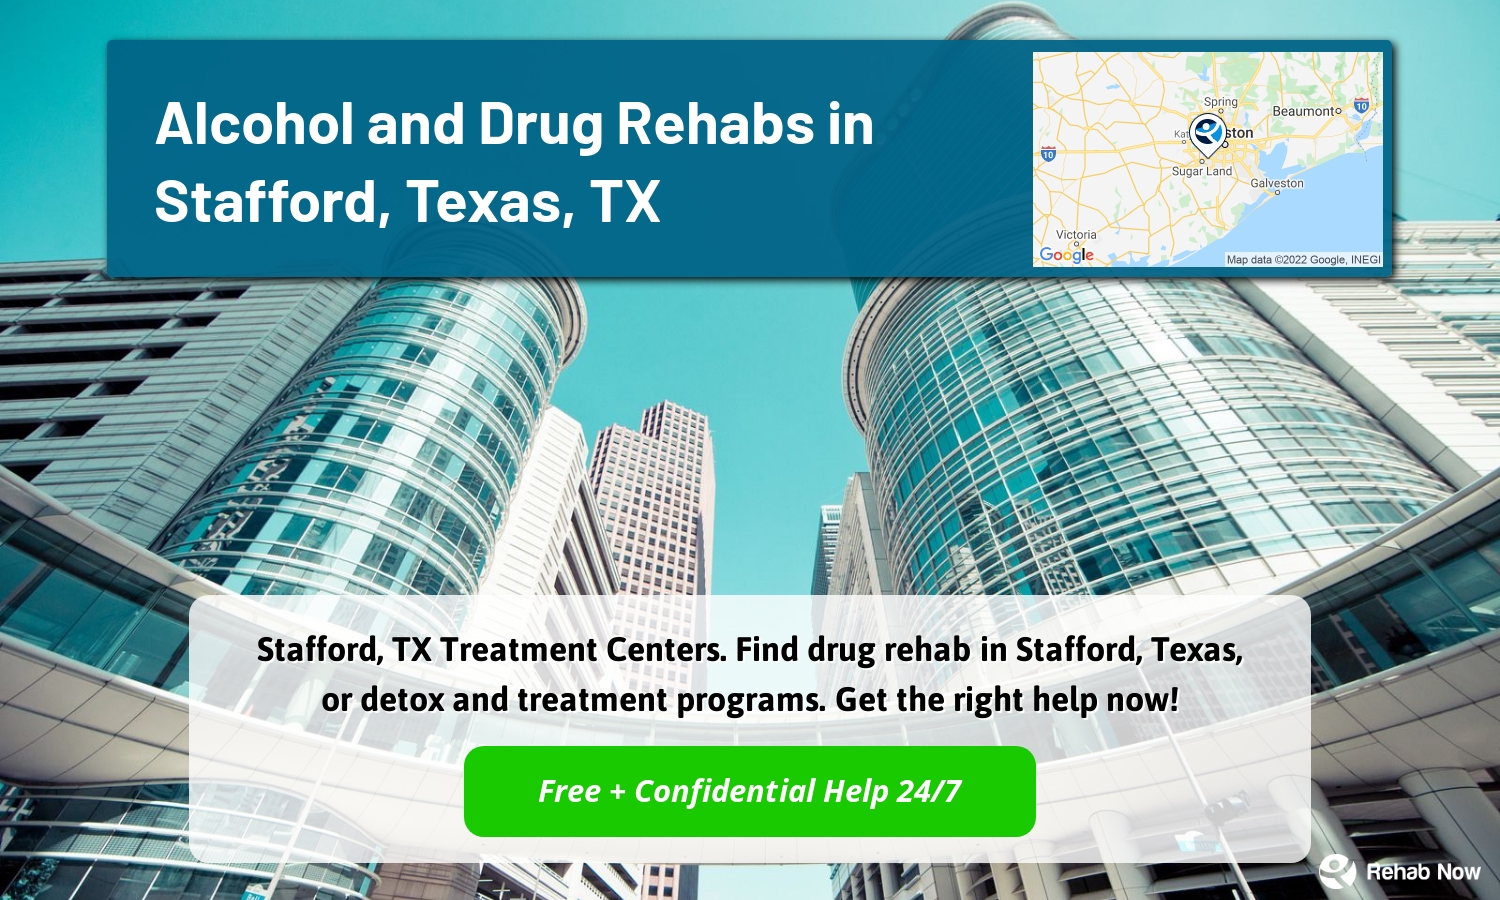 Stafford, TX Treatment Centers. Find drug rehab in Stafford, Texas, or detox and treatment programs. Get the right help now!